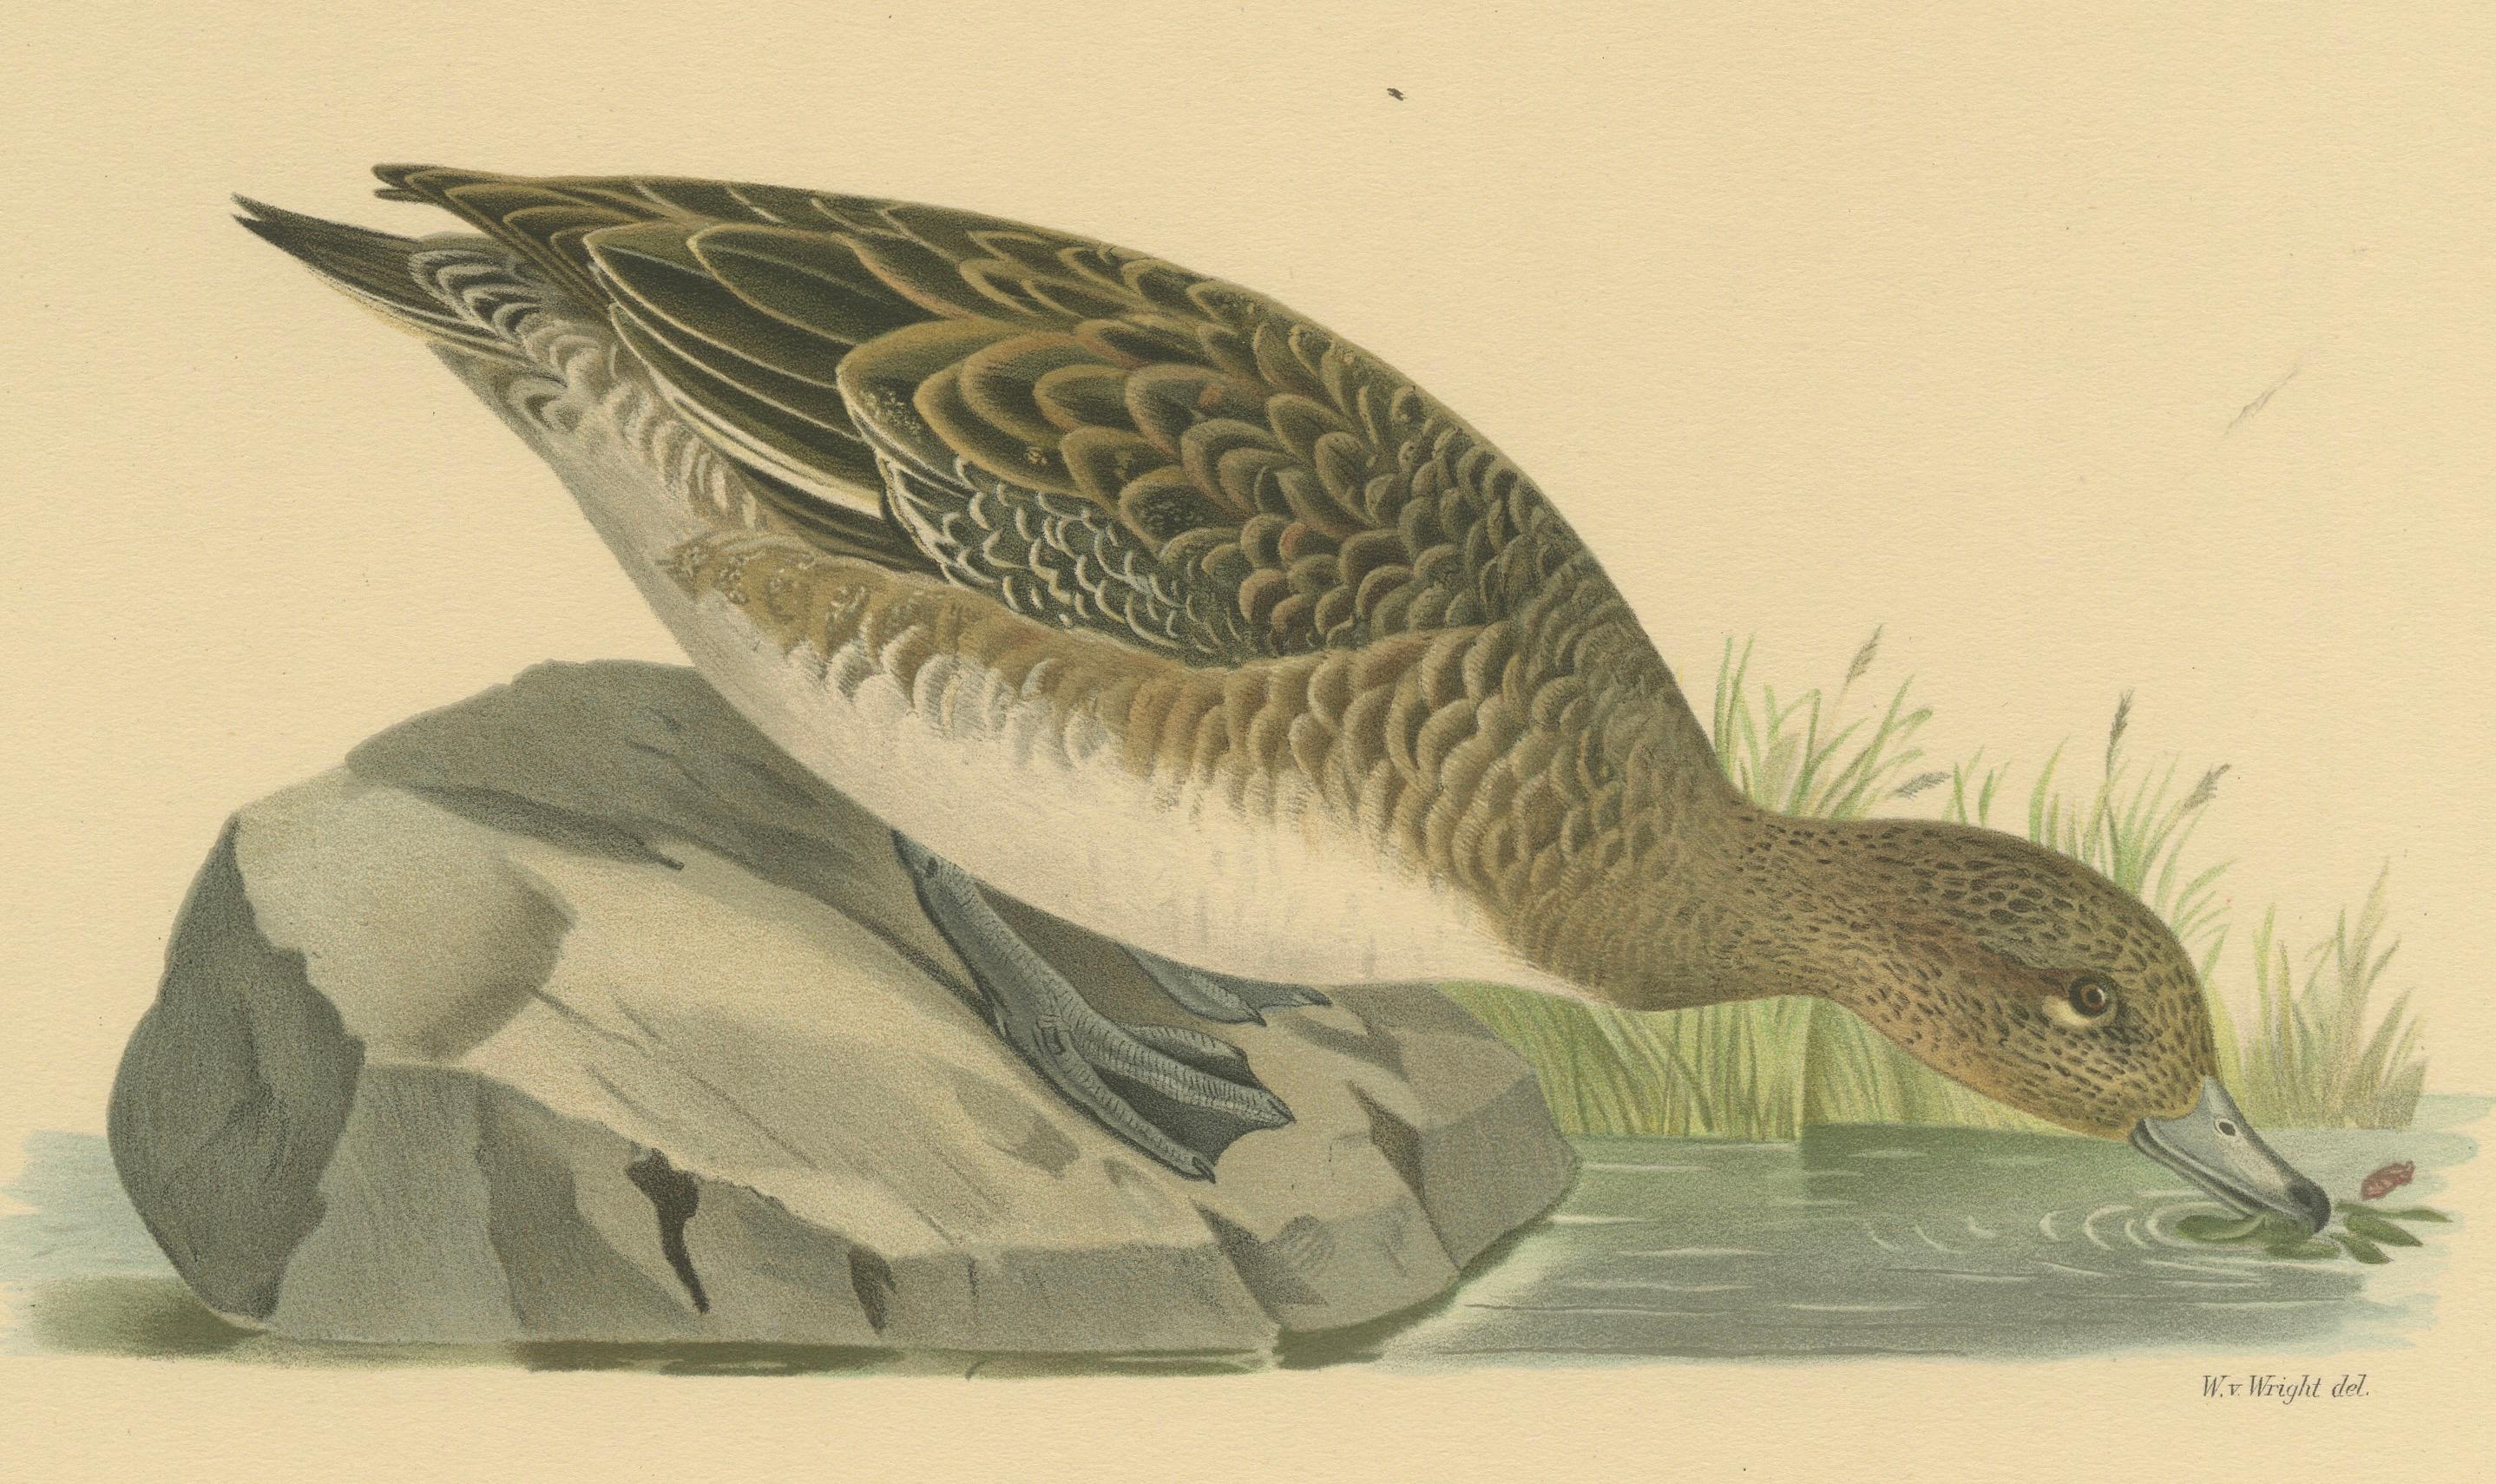 This image is a delicately crafted illustration of a female Eurasian Wigeon, known scientifically as Anas (Mareca) Penelope. The bird is positioned resting on a rock, with its head gracefully extended towards the water, as if captured mid-drink. Its